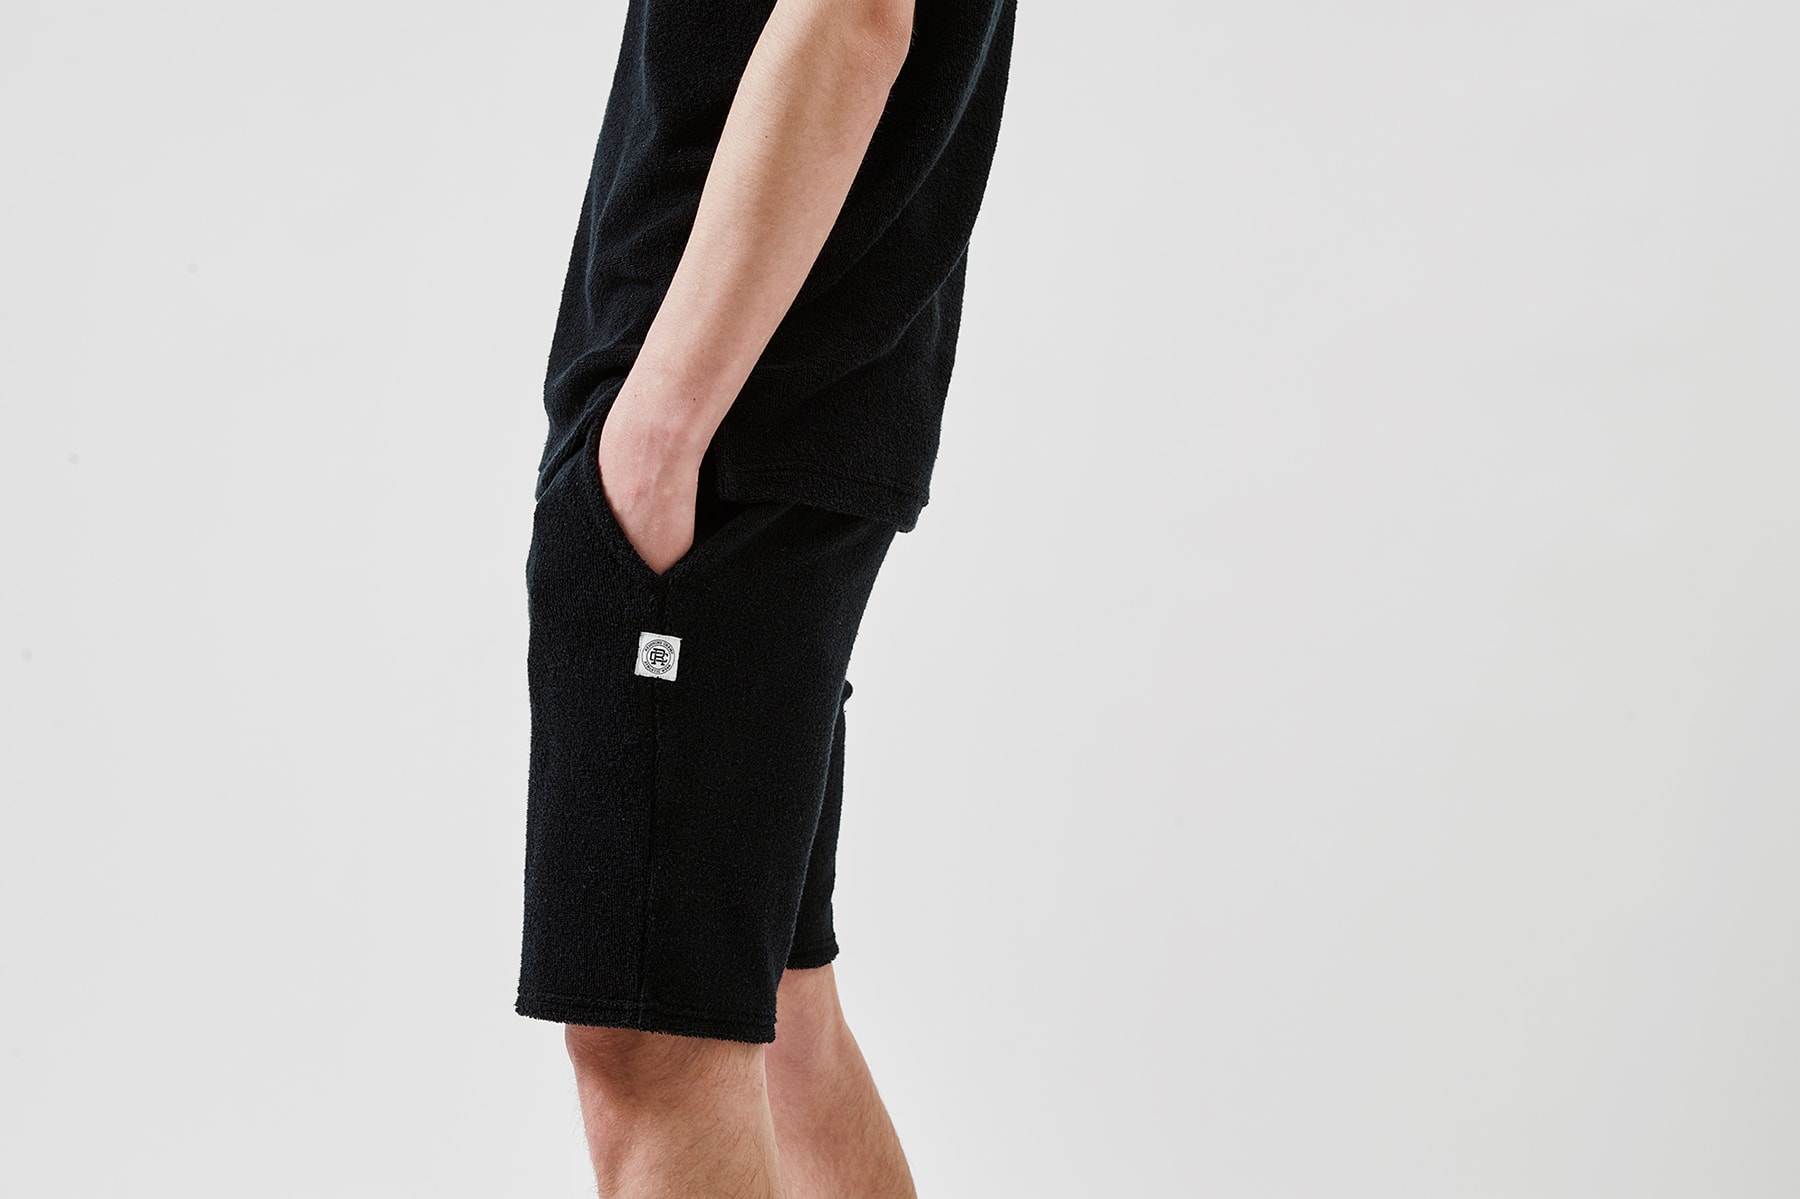 Reigning Champ Ron herman japan spring summer 2018 collaboration collection pile hoodie t shirt tank top shorts black drop release